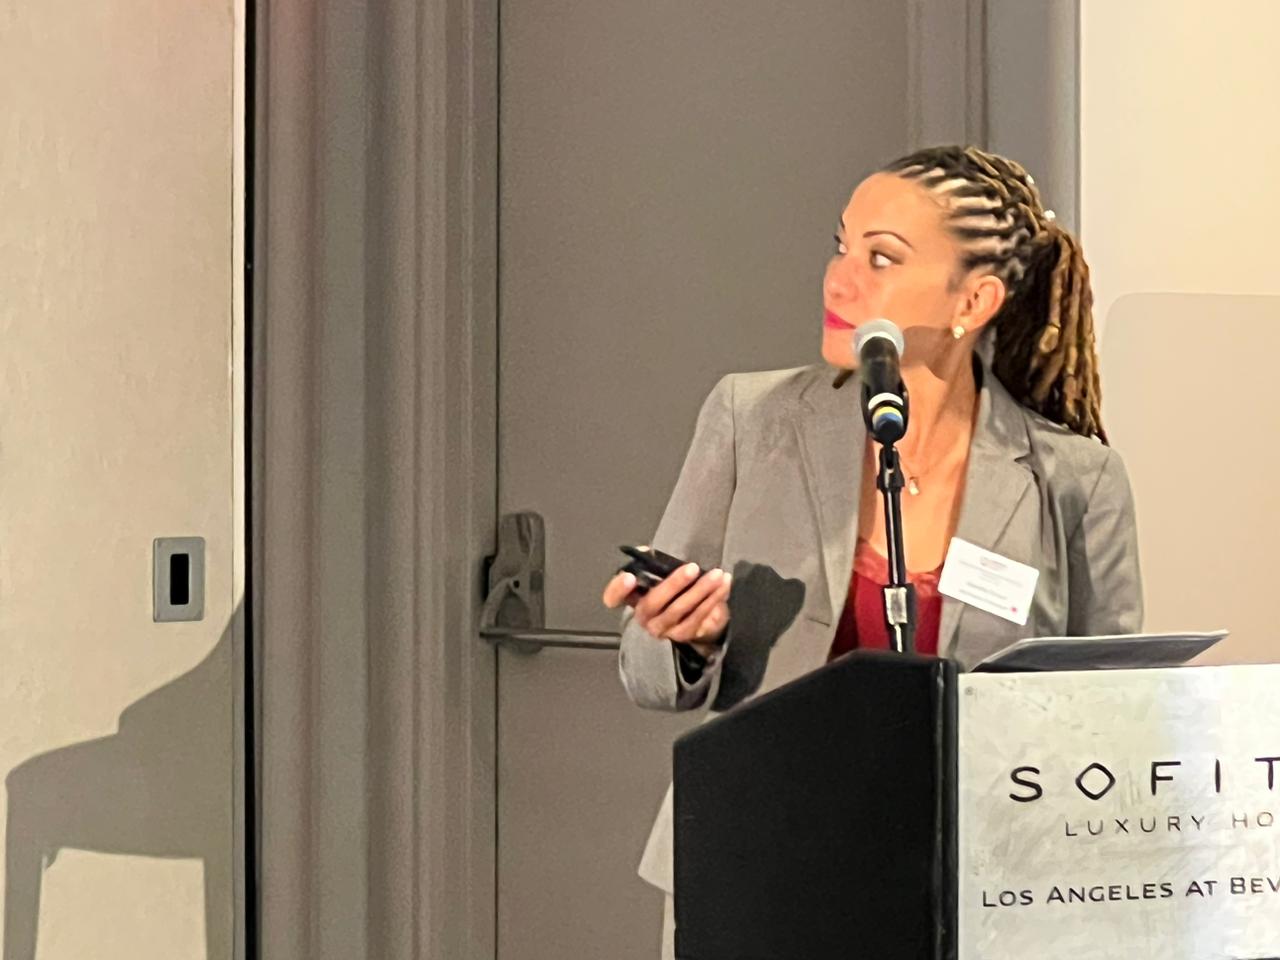  BVI PROVIDES PRACTICAL, YET SAVVY, SOLUTIONS TO PRIVATE WEALTH MANAGEMENT SAYS ADENIKE SICARD AT AMERICA OUTBOUND INVESTMENT SUMMIT IN LOS ANGELES